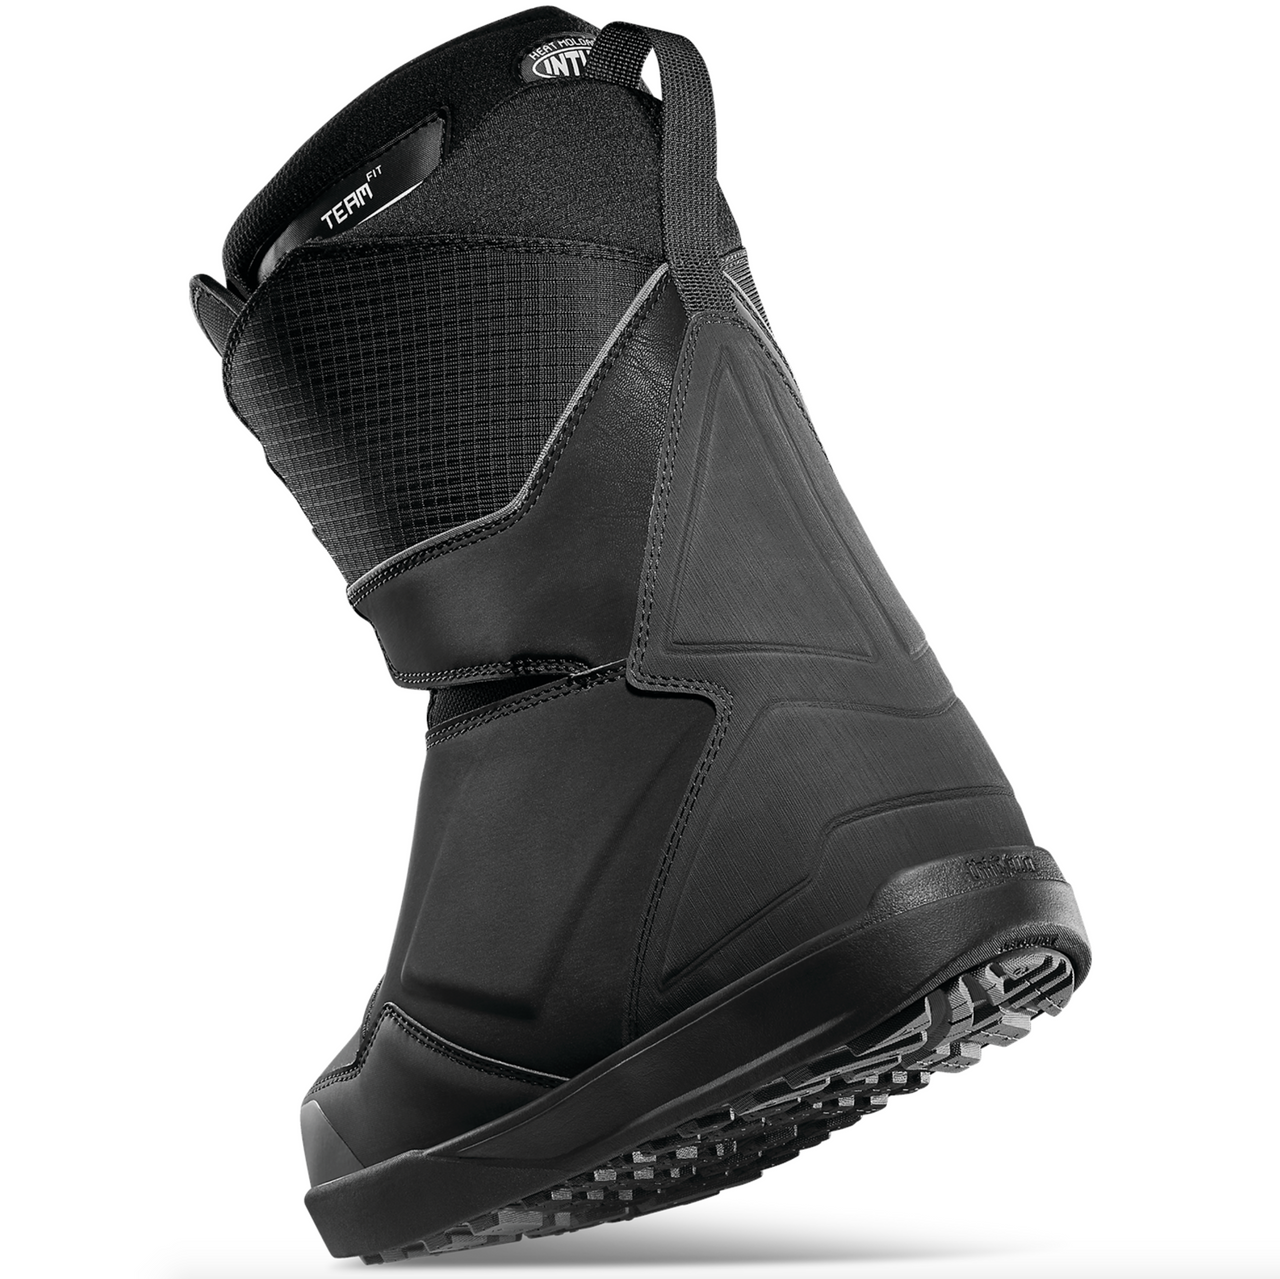 Thirtytwo 2024 Lashed Double Boa Snowboard Boots - Black